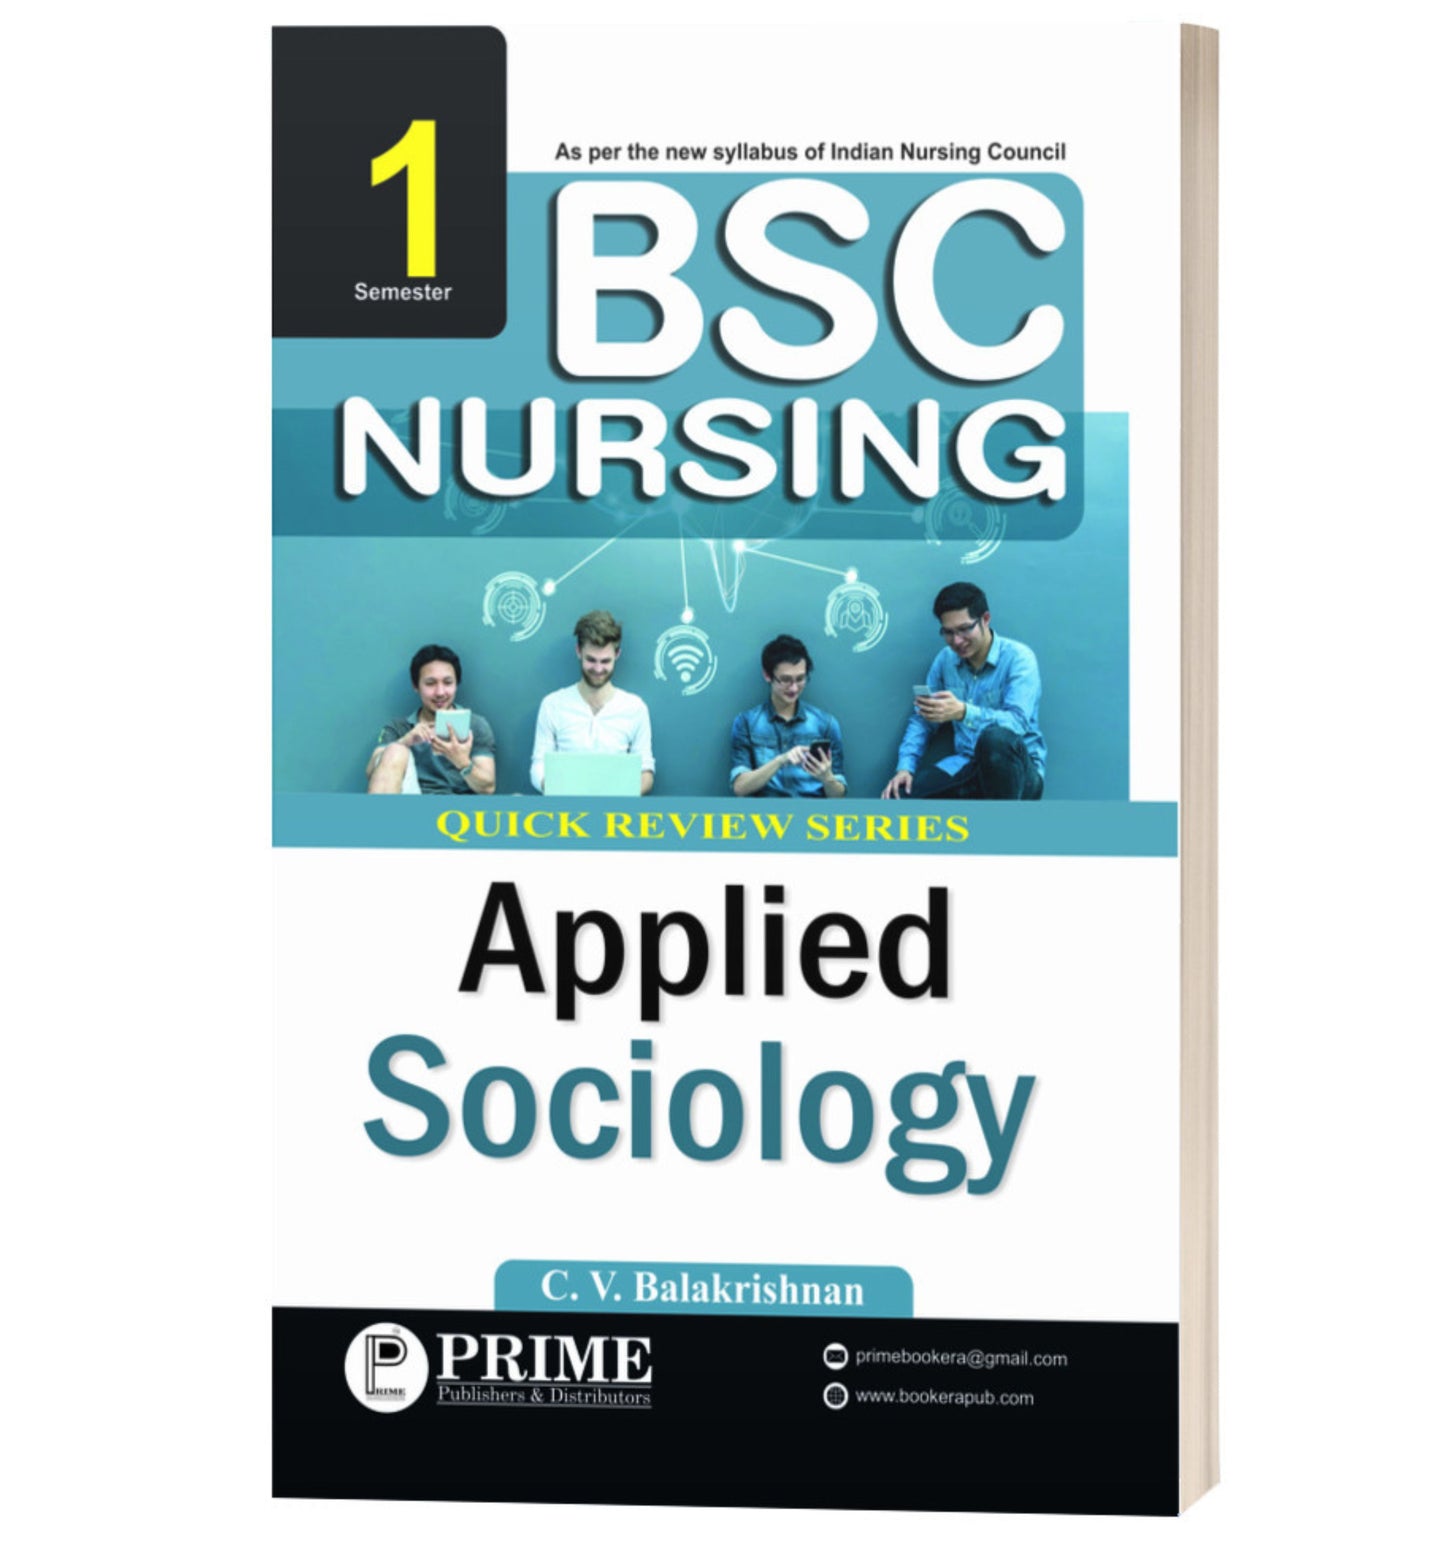 Quick Review Series of Applied Sociology